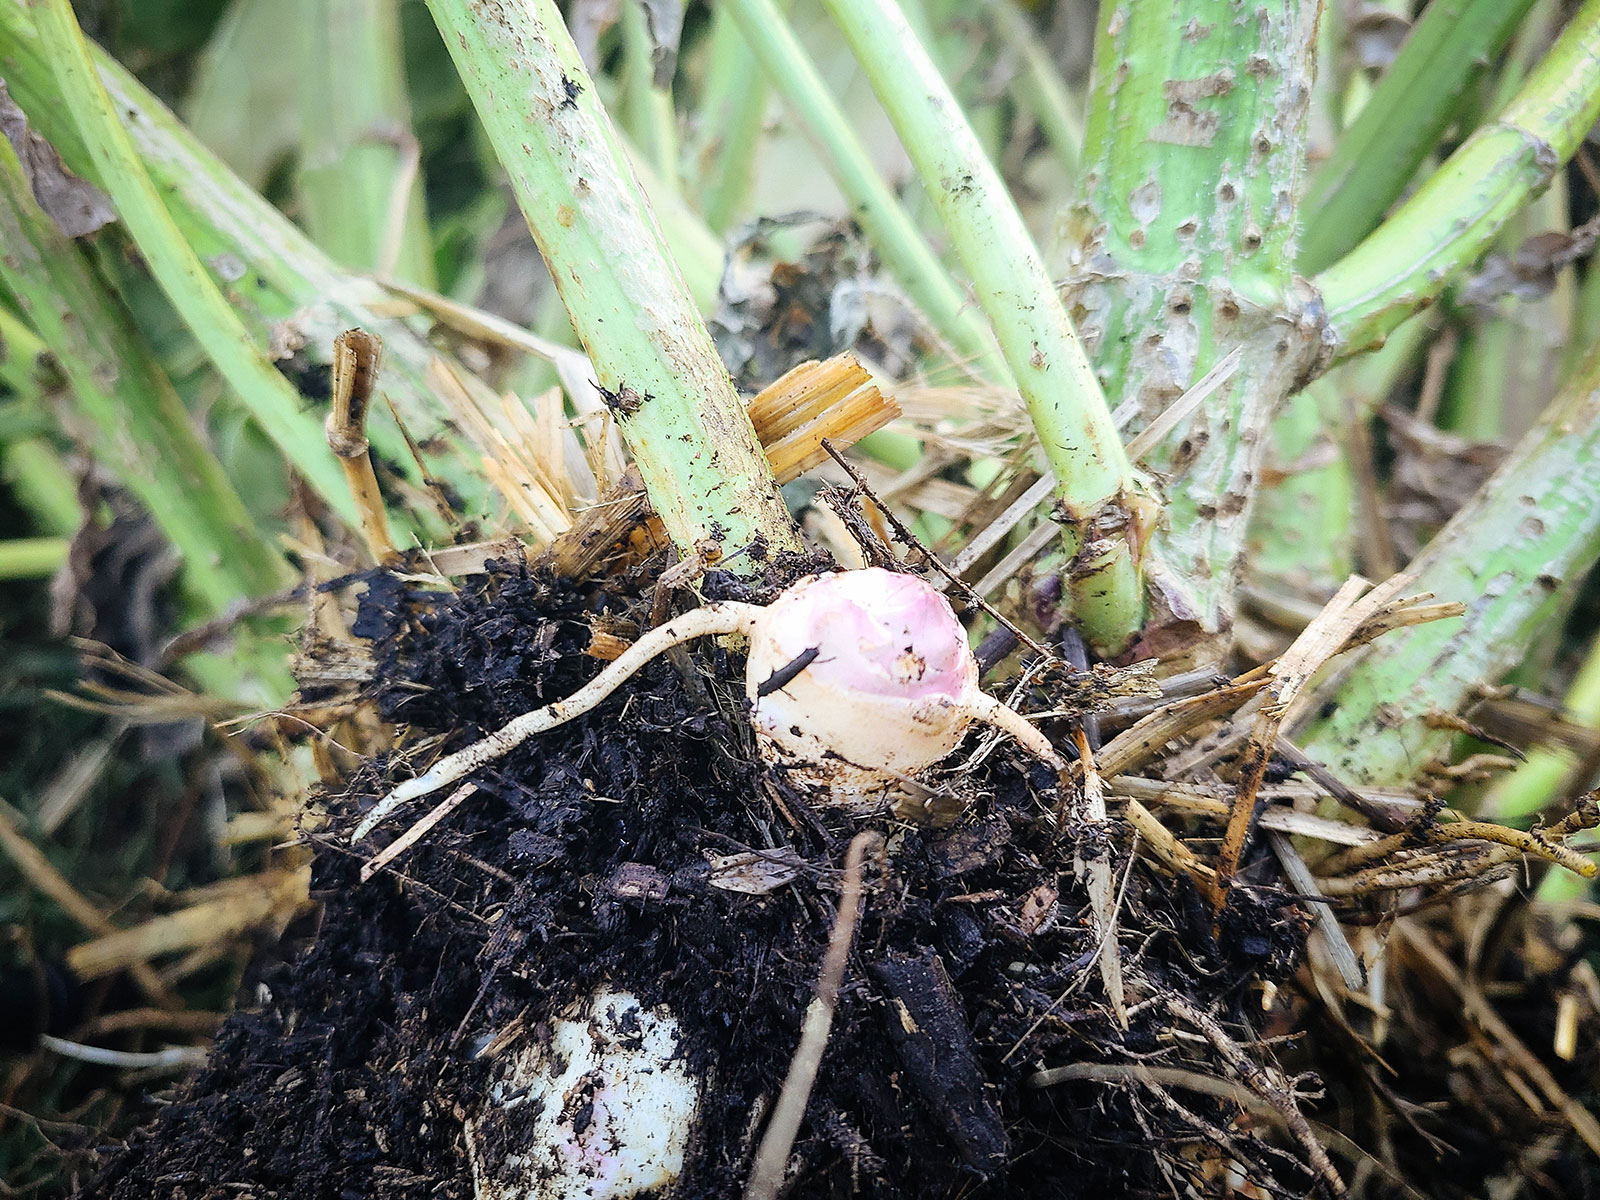 A smooth Jerusalem artichoke tuber with roots already forming